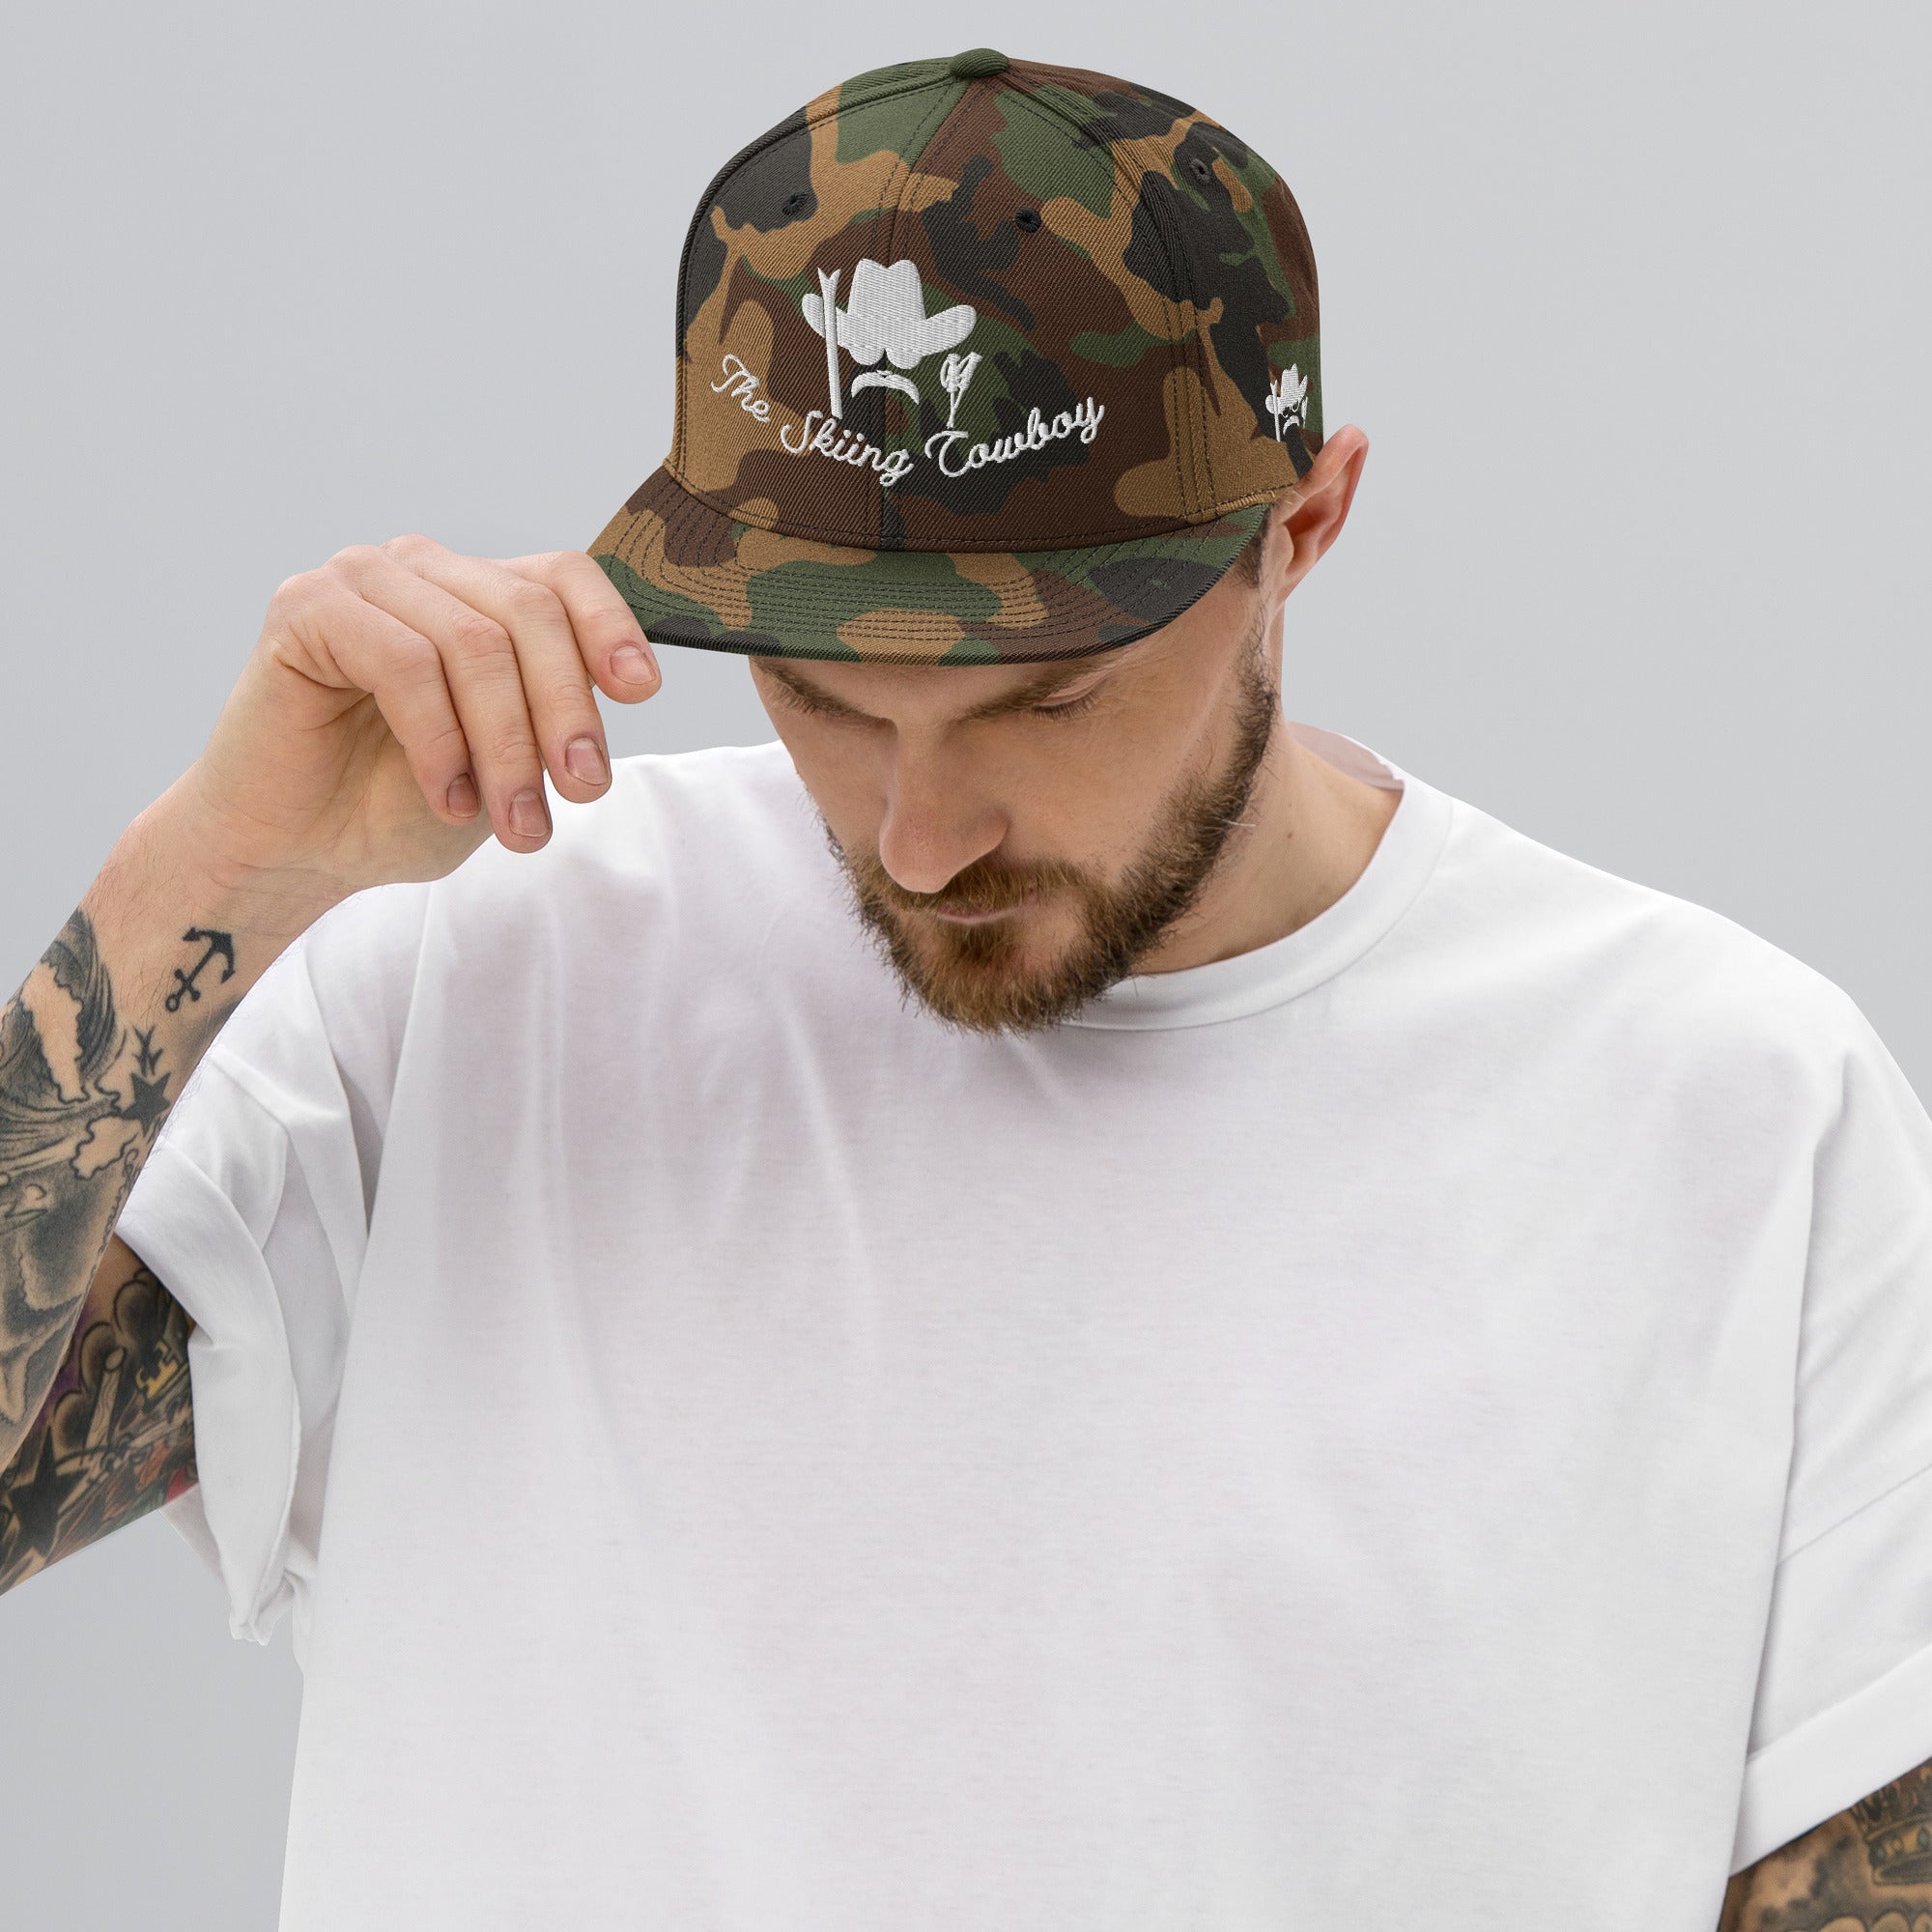 Camo Snapback Wool Blend Cap The Skiing Cowboy White embroidered pattern (3 sides)